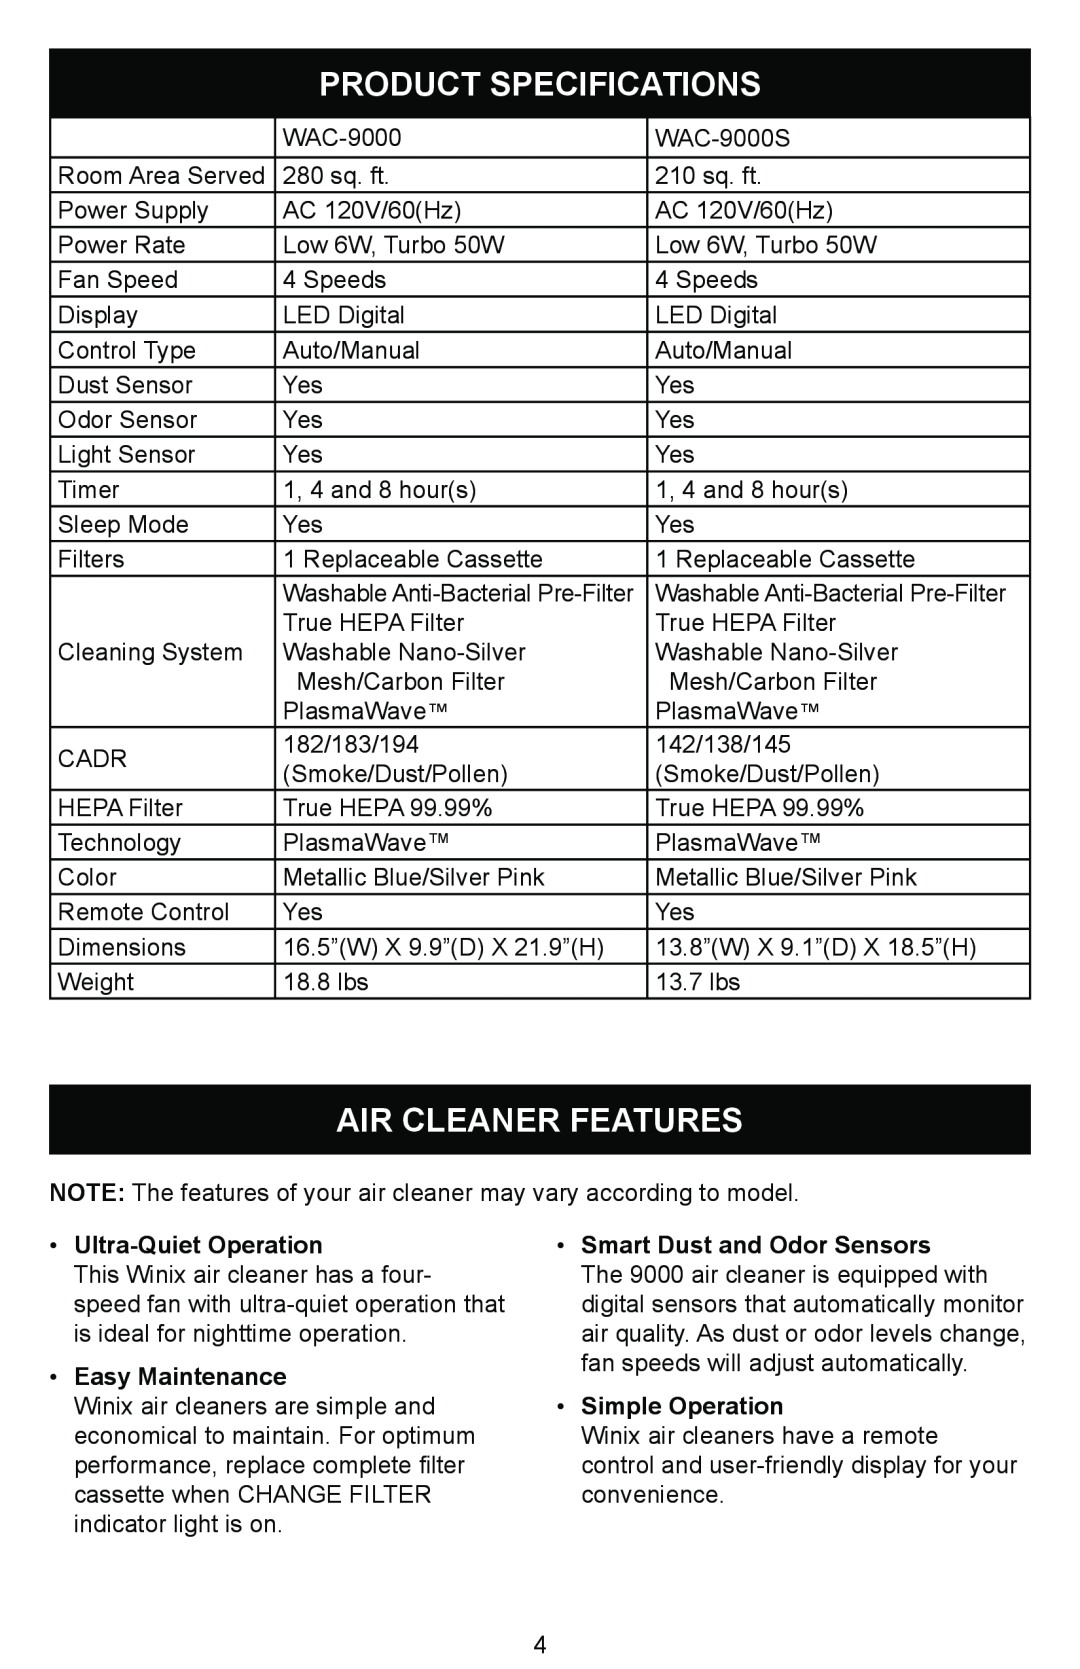 Winix WAC-9000 Product Specifications, Air Cleaner Features, •Ultra-QuietOperation, •Easy Maintenance, •Simple Operation 